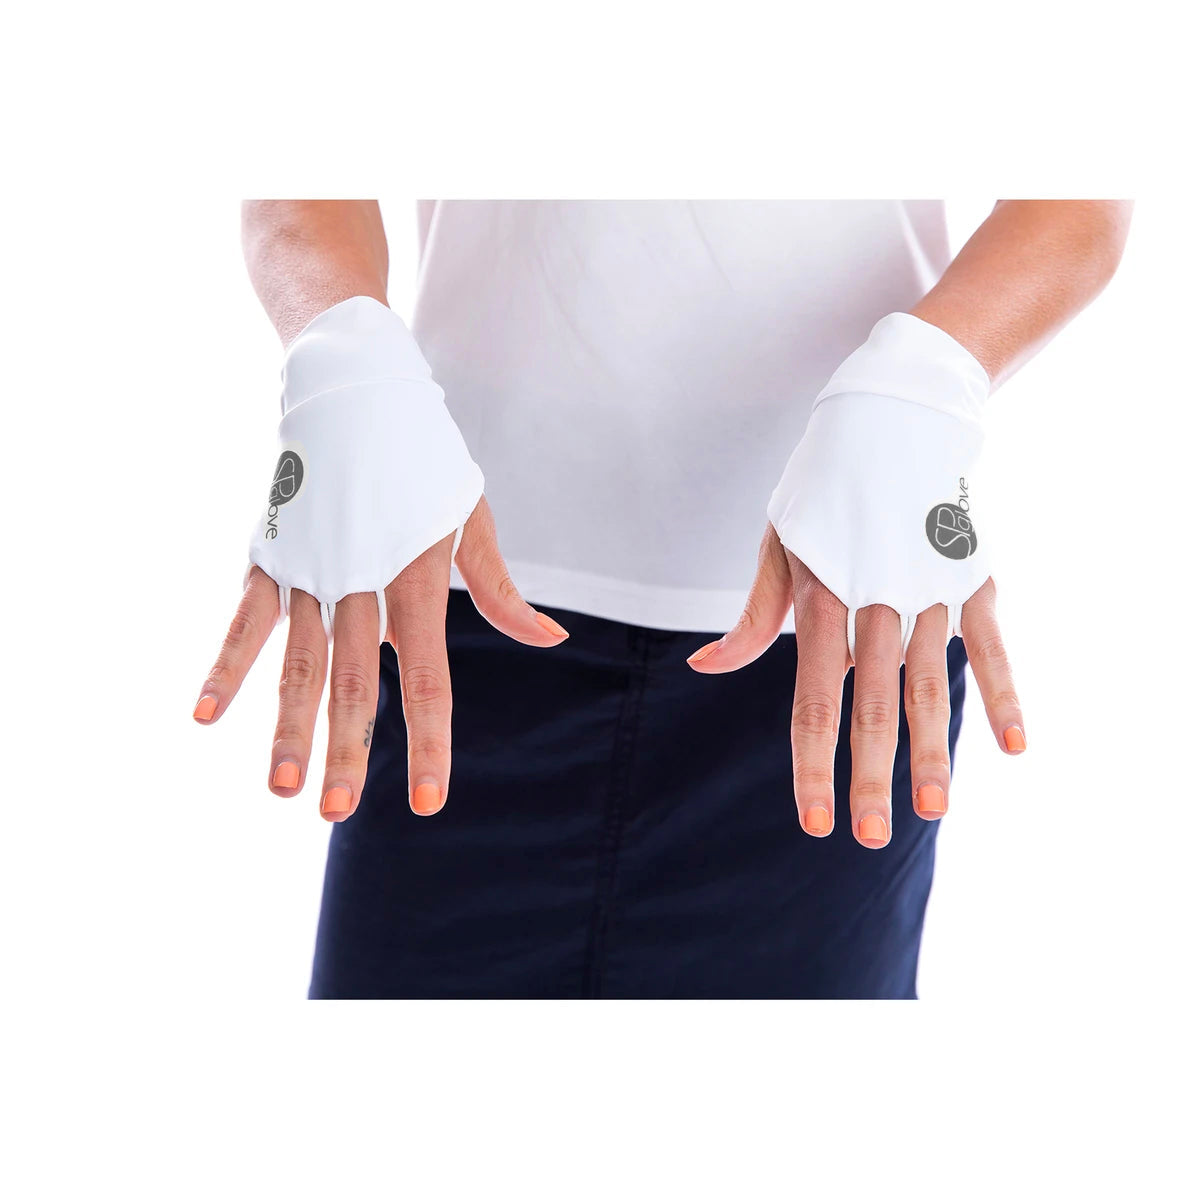 Image of a model wearing SParms sun protective gloves.